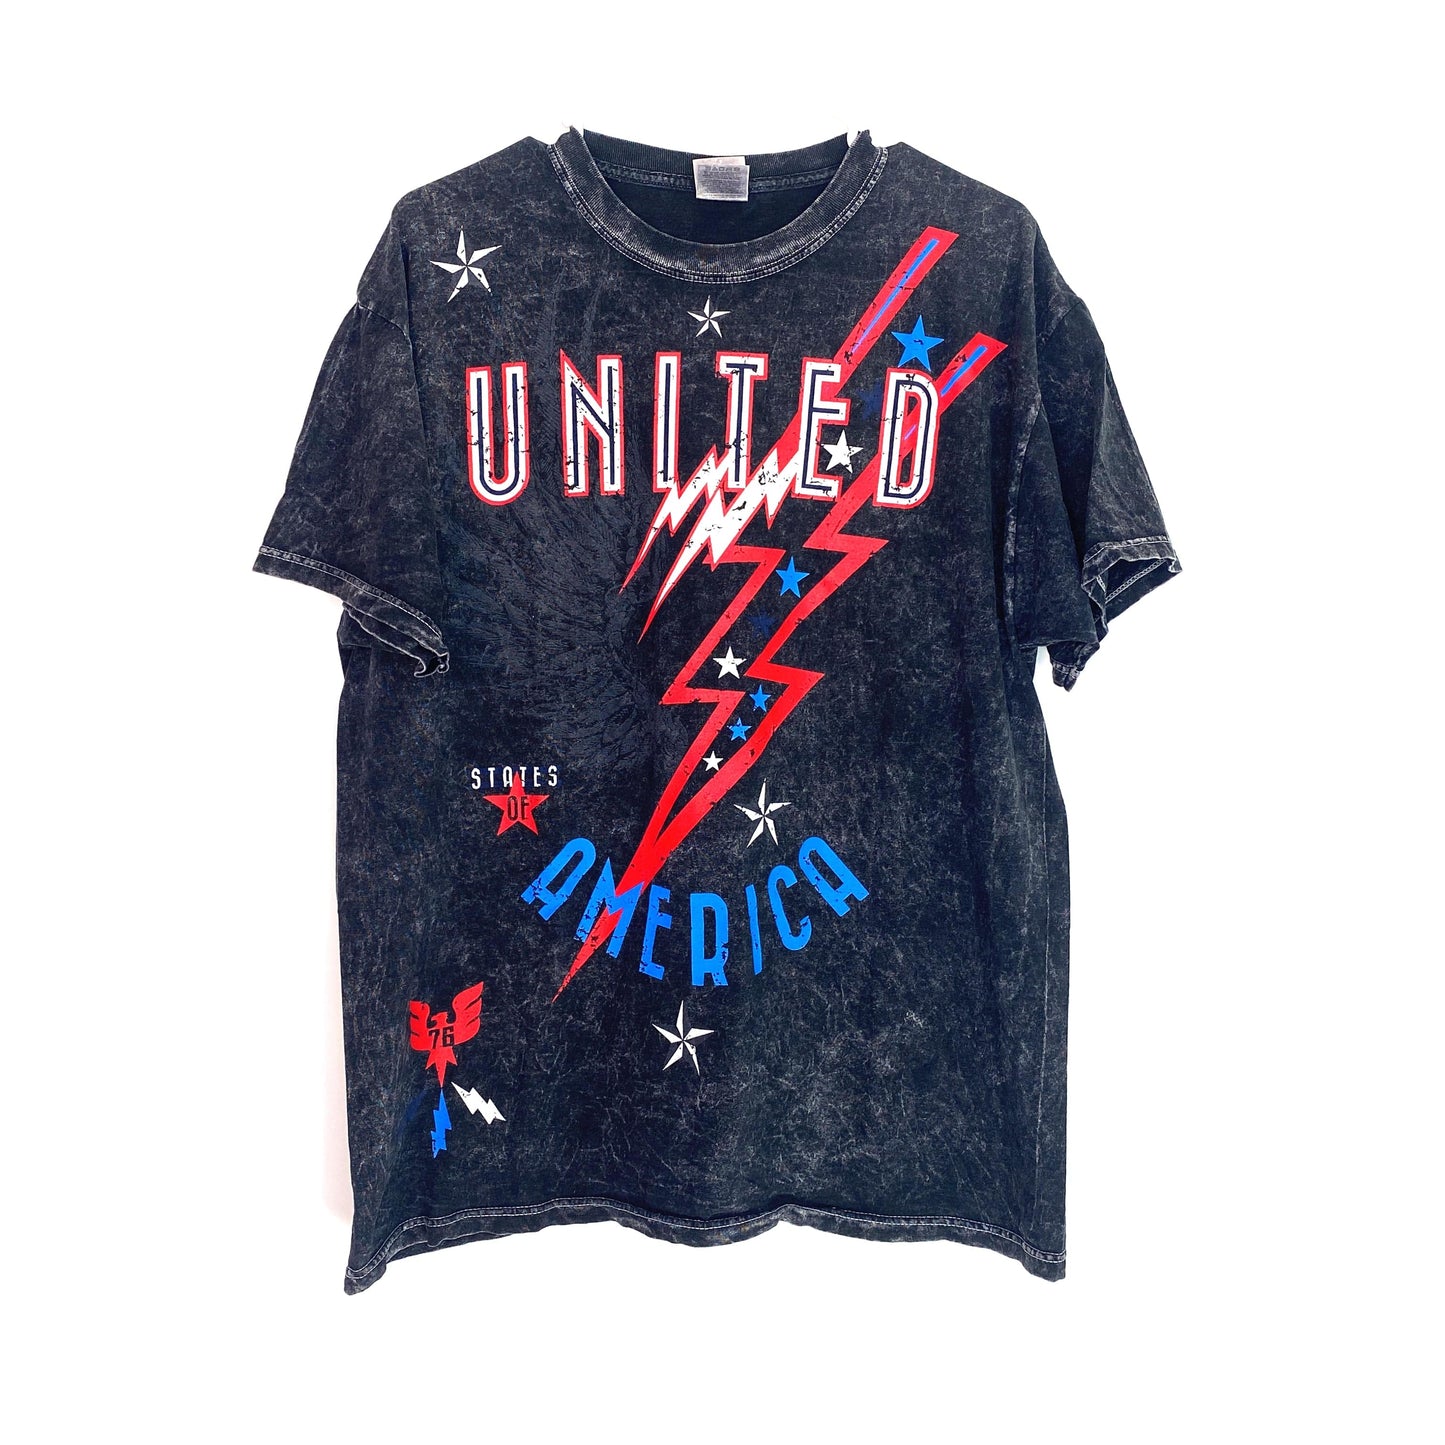 USA 1776 Mens Size XL Black Red White Blue Stone Washed T-Shirt S/s